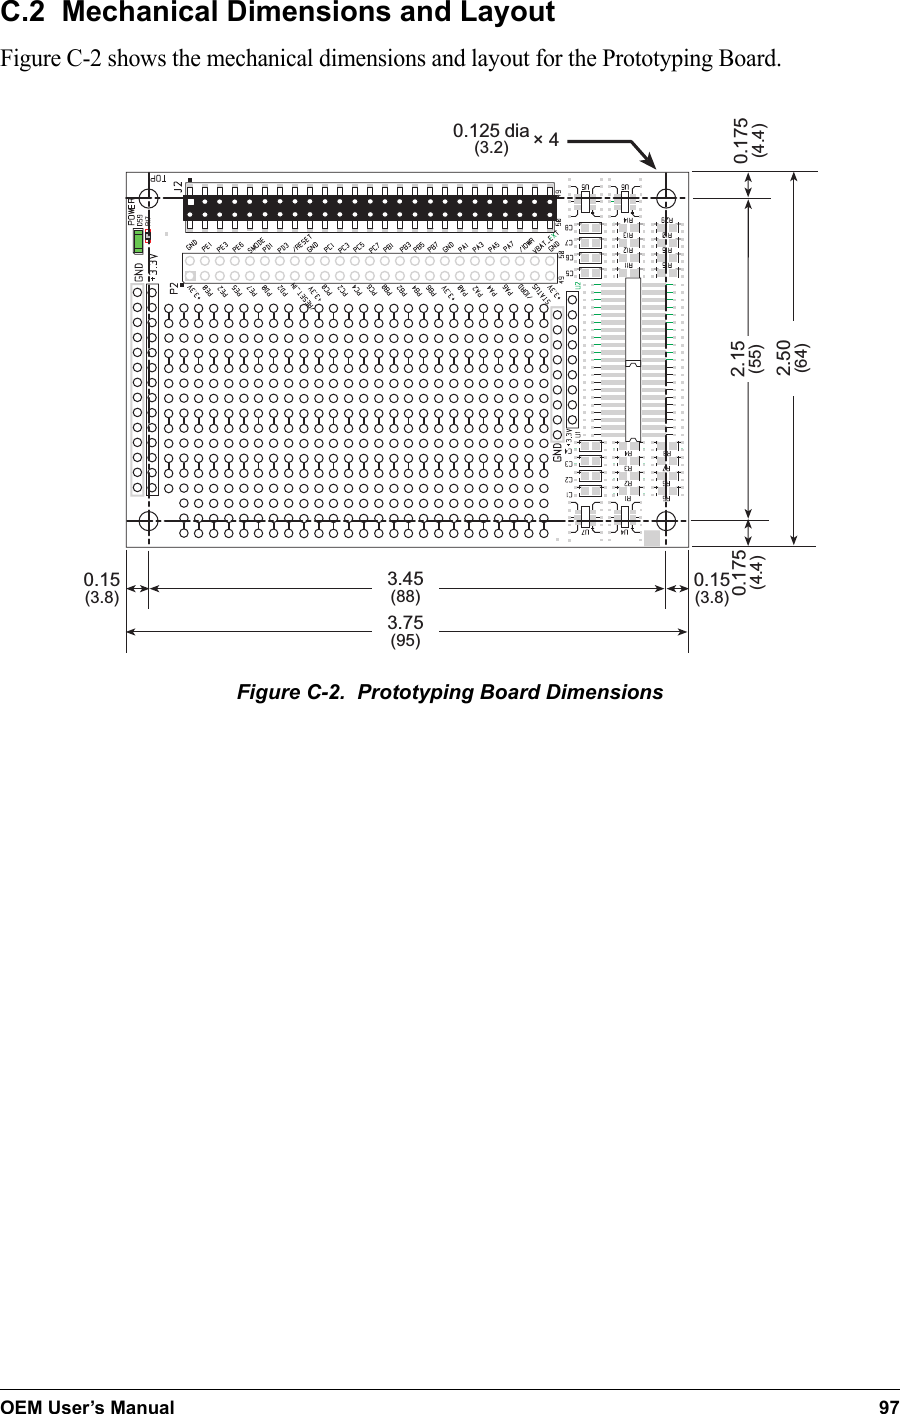 OEM User’s Manual 97C.2  Mechanical Dimensions and LayoutFigure C-2 shows the mechanical dimensions and layout for the Prototyping Board.0.15(3.8)0.15(3.8)0.175(4.4)3.45(88)3.75(95)2.50(64)0.175(4.4)× 40.125 dia(3.2)2.15(55)Figure C-2.  Prototyping Board Dimensions